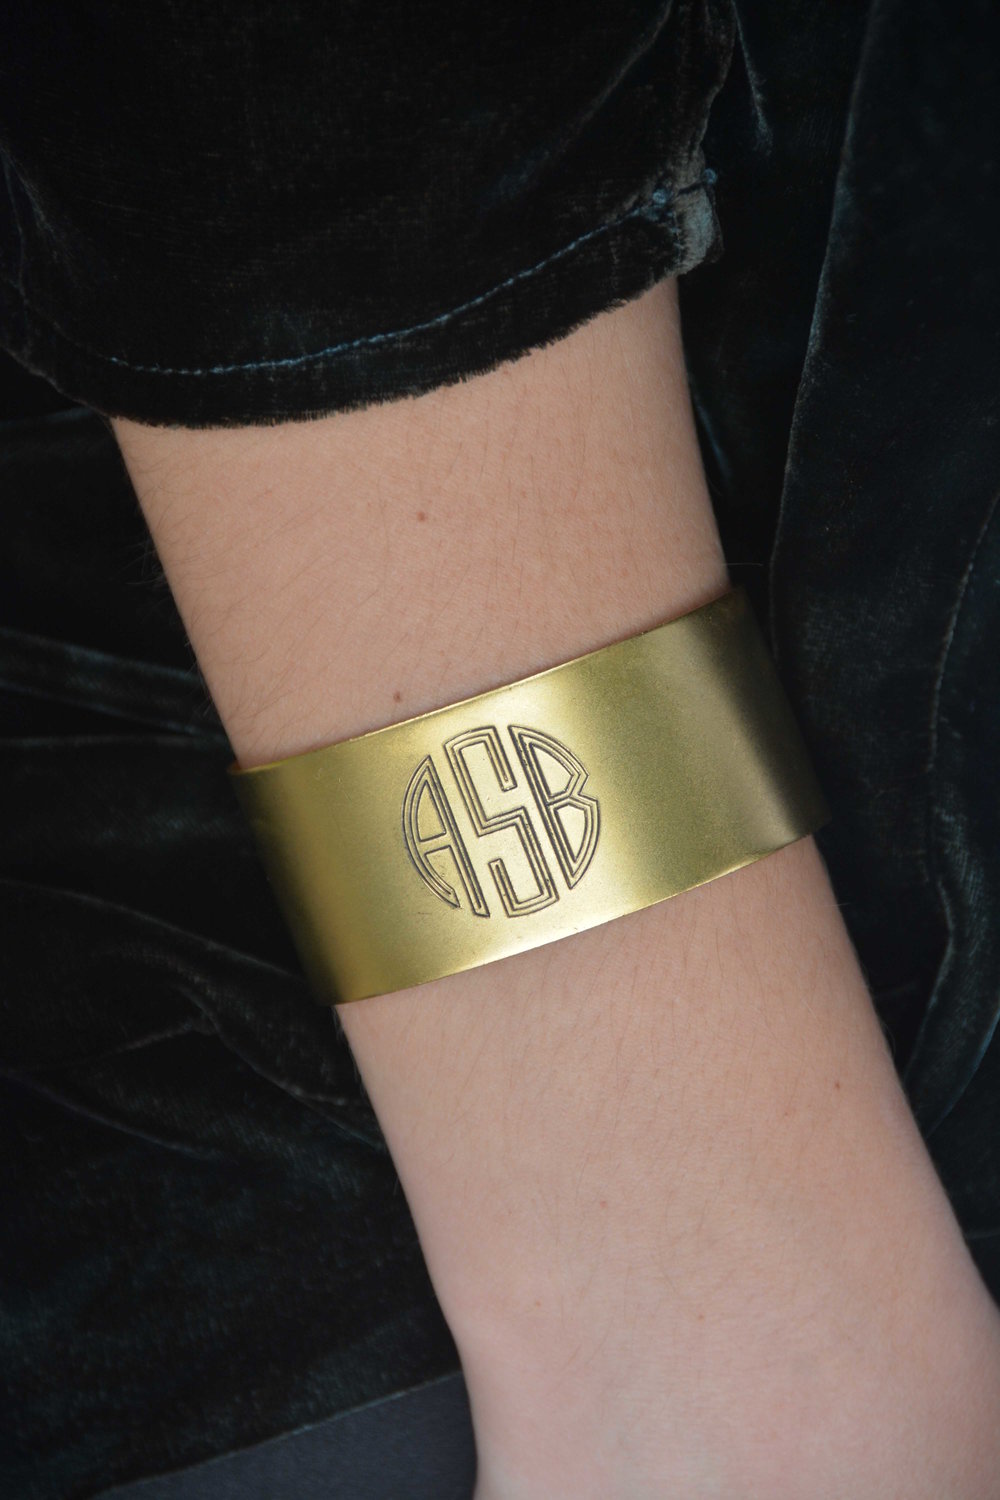 Details about   New Personalized Jewelry Monogram Big Bold Cuff Bracelet Name Initials Gifts 